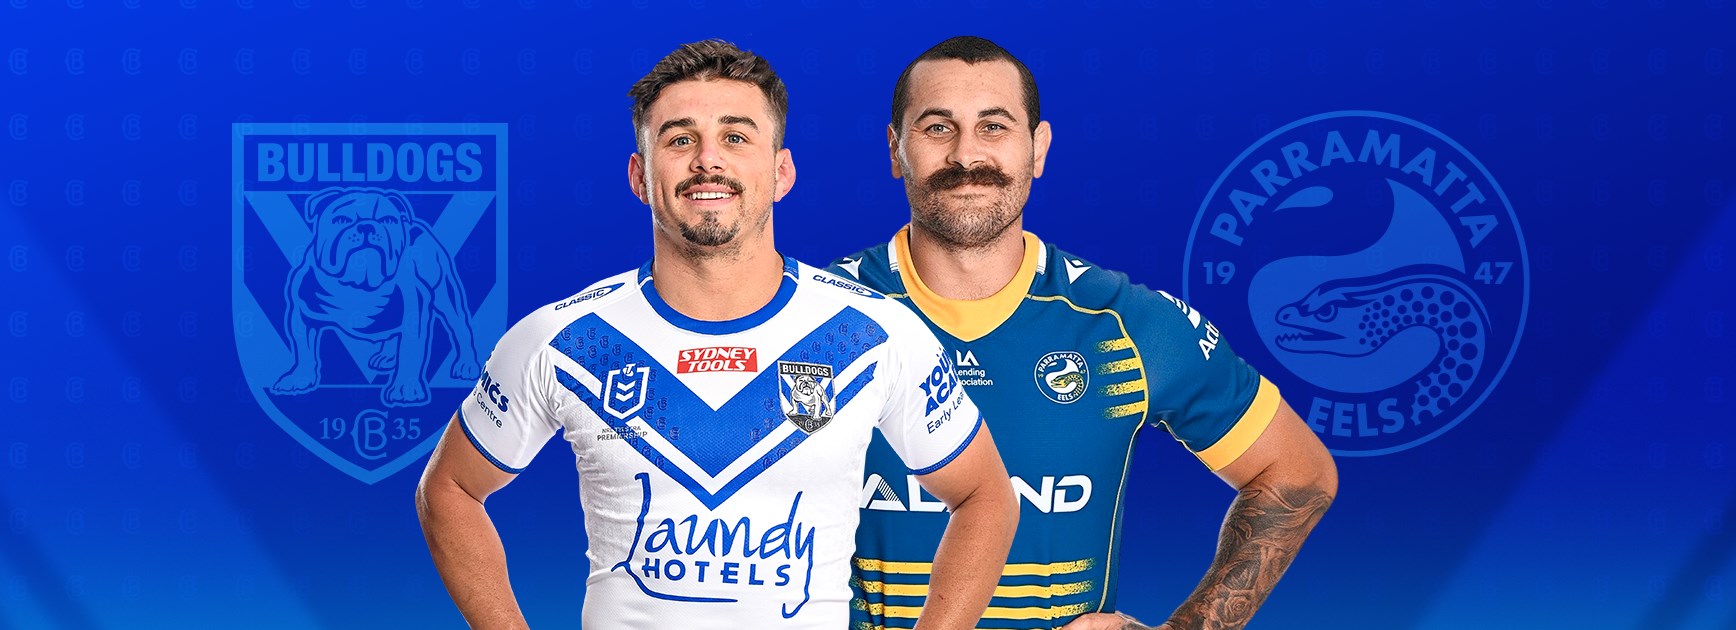 Bulldogs v Eels: Mahoney cleared to play; Hodgson ruled out